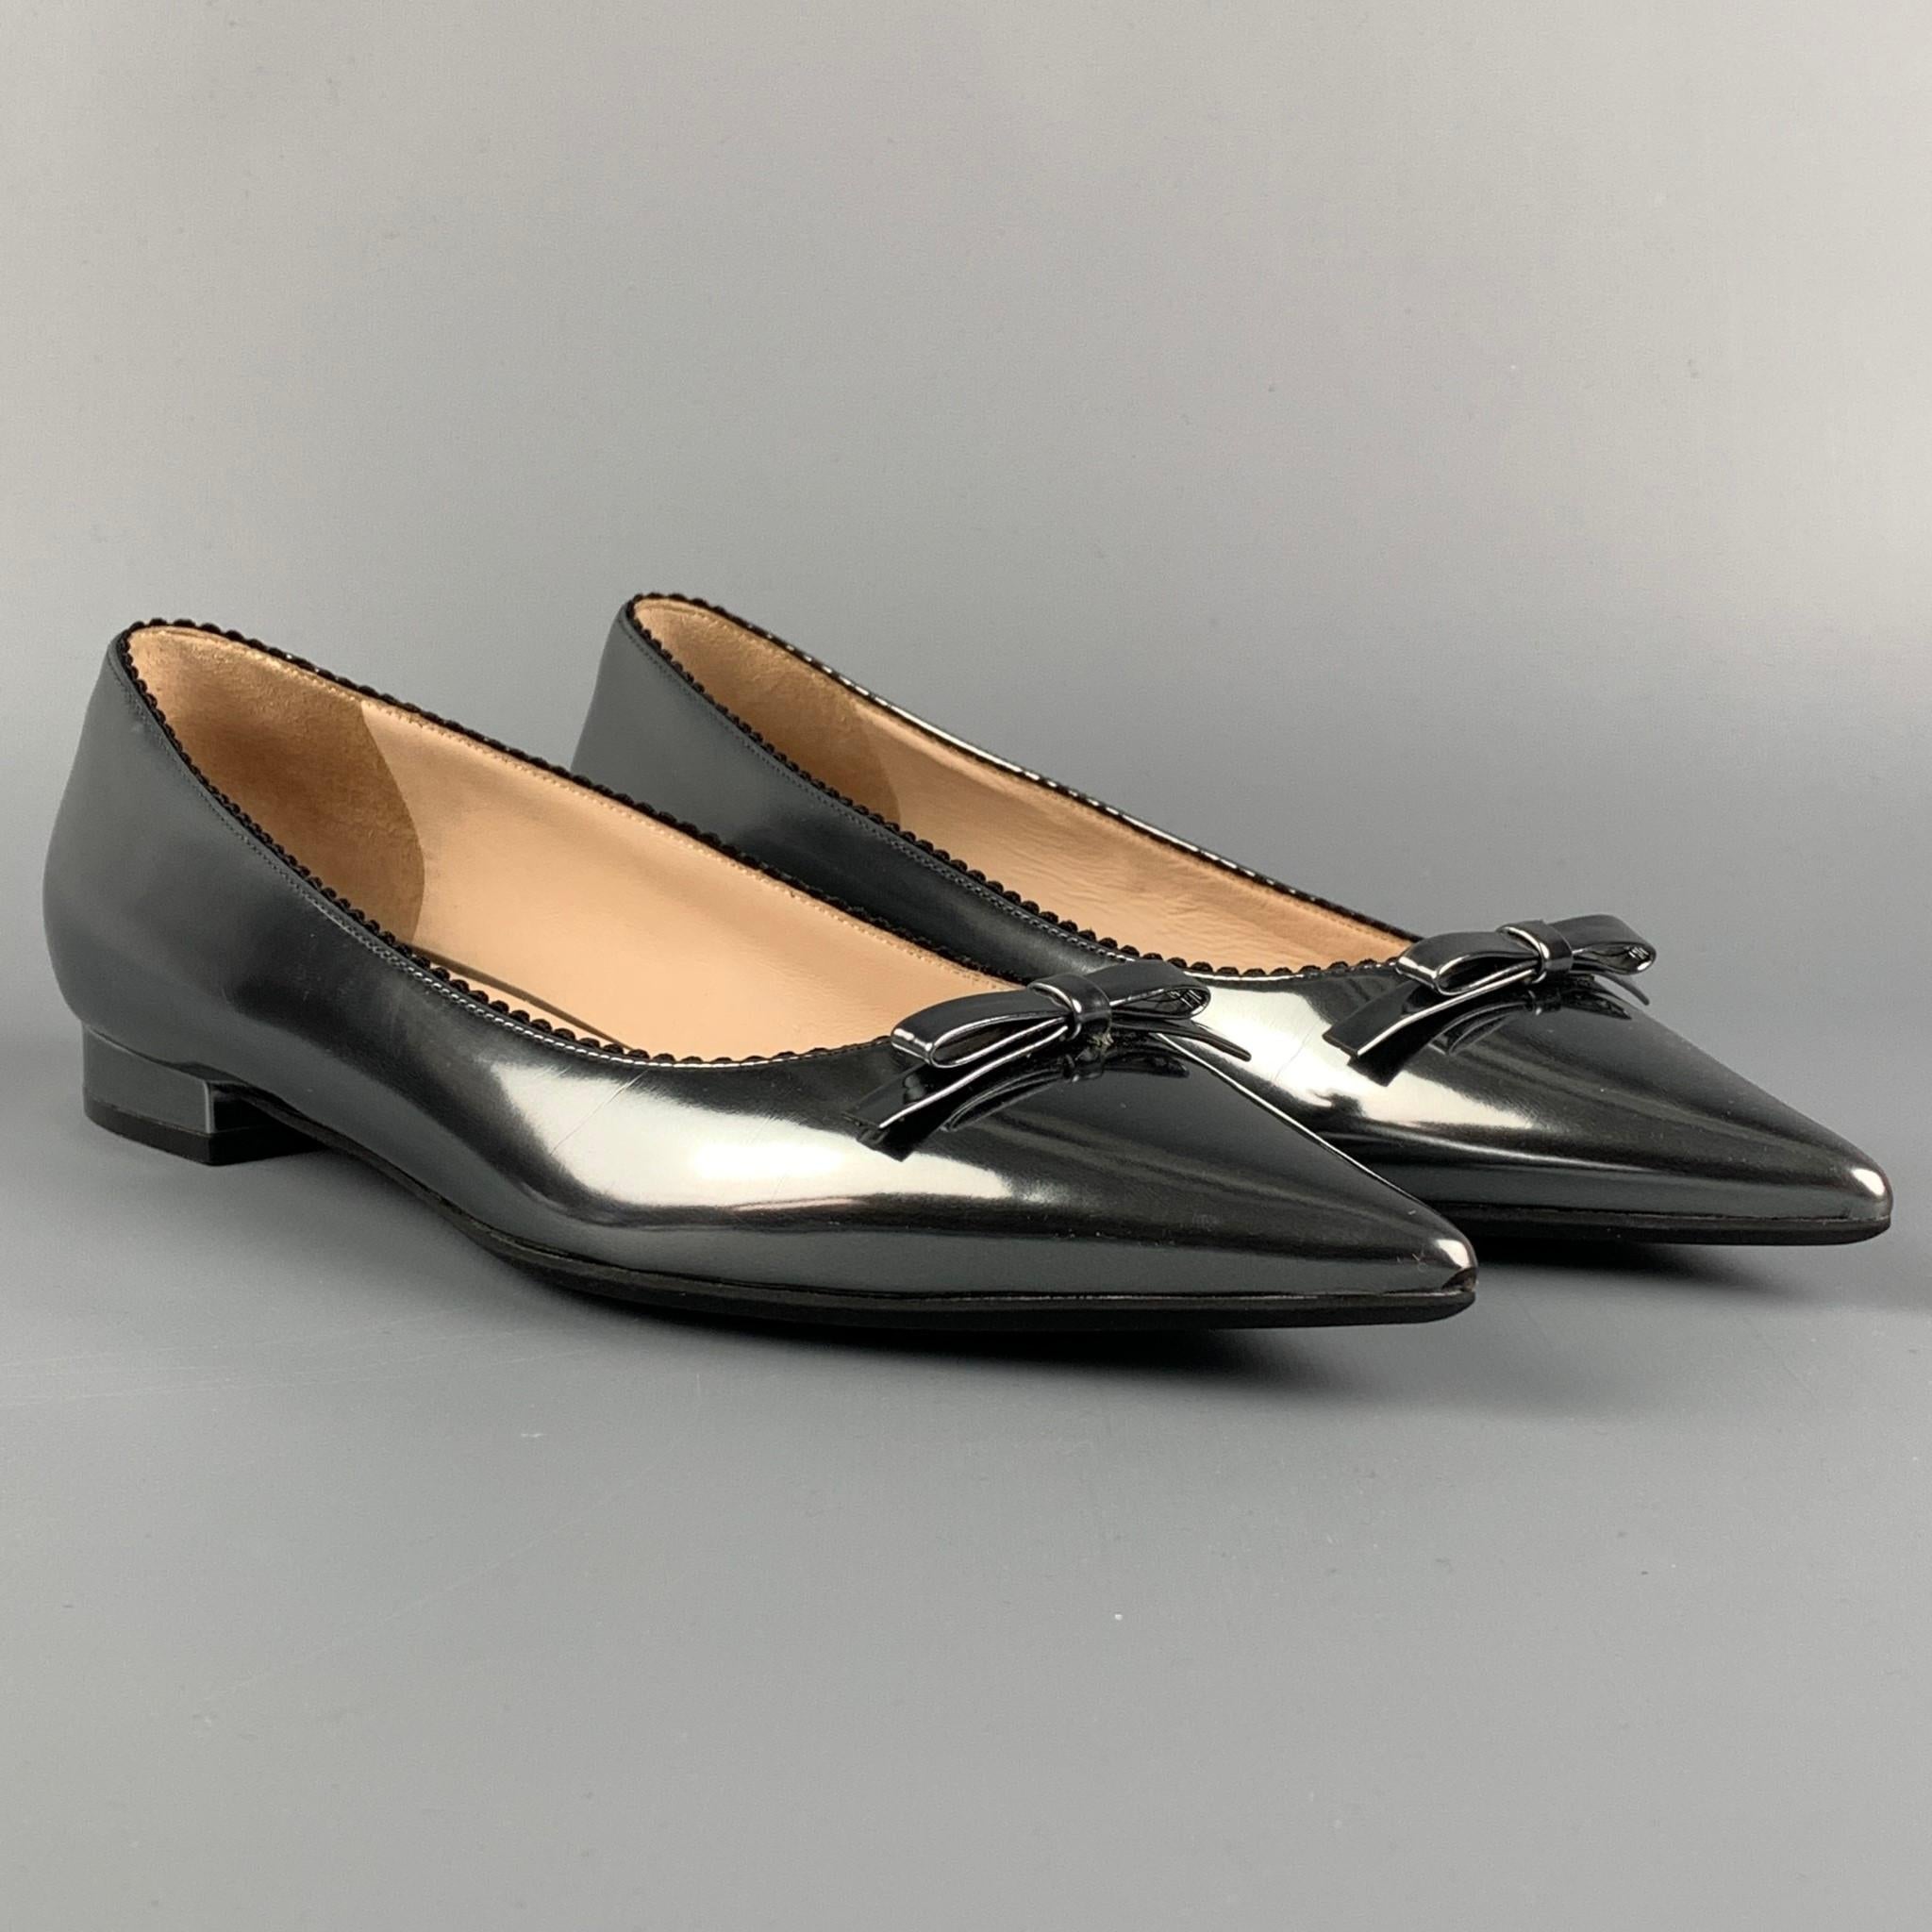 Nº21 flats comes in a silver leather featuring a slip on style, front bow, and a pointed toe. Made in Italy. 

Excellent Pre-Owned Condition.
Marked: 37

Outsole: 10.5 in. x 3 in. 